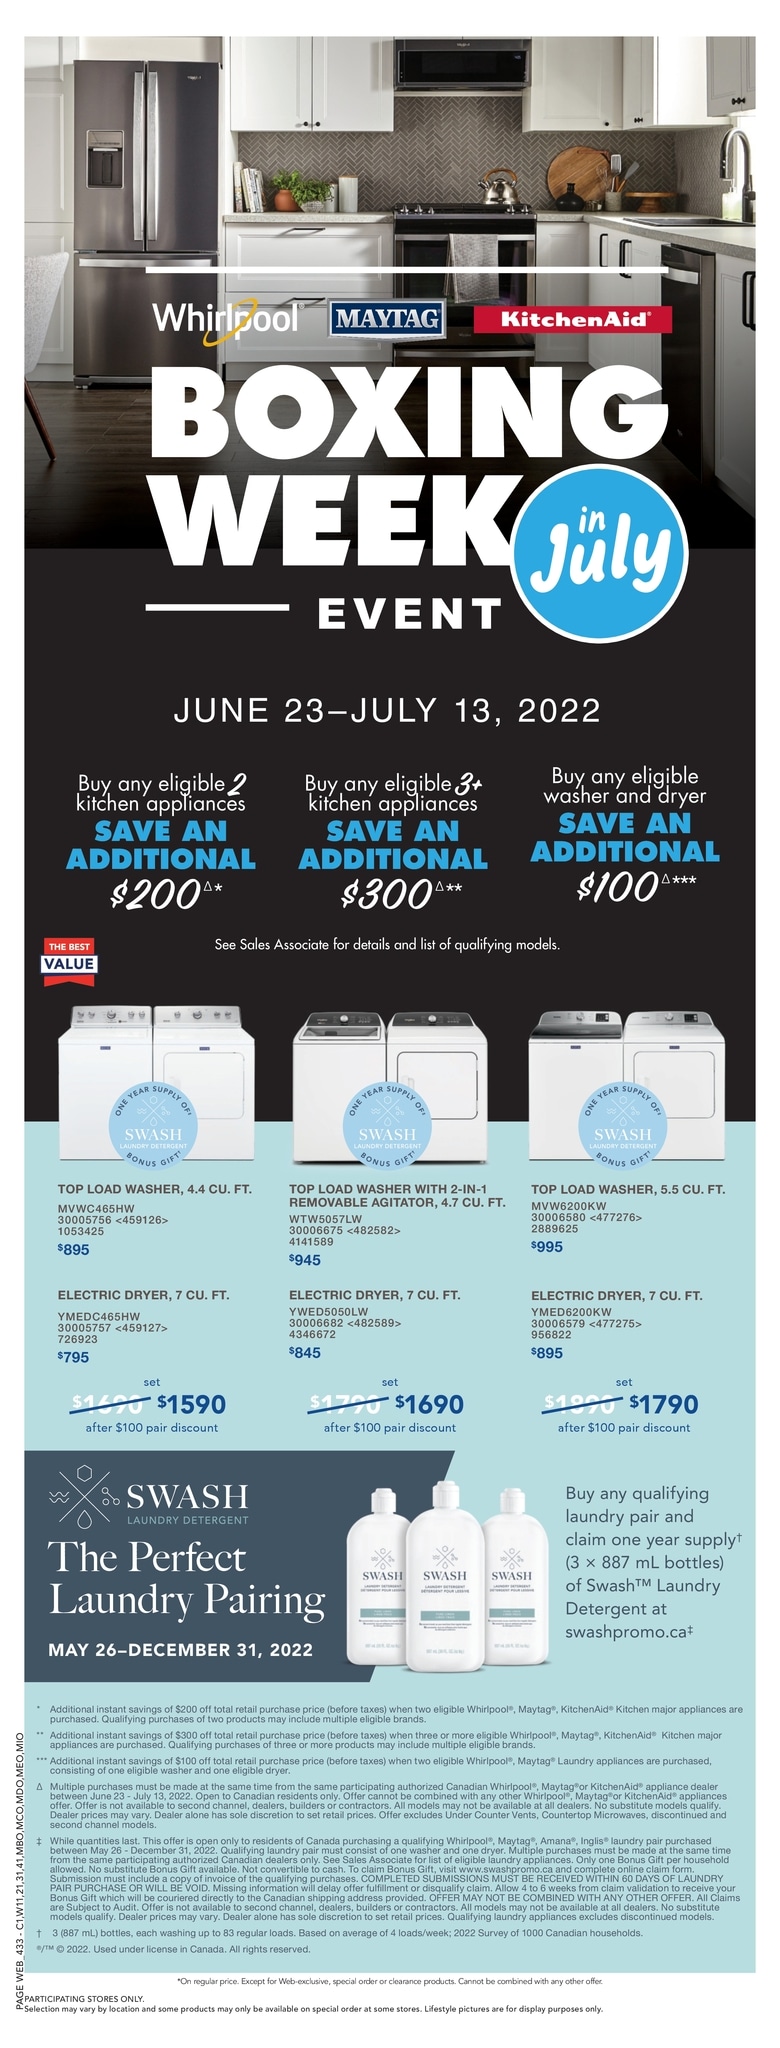 Rona - Weekly Flyer Specials - Page 5